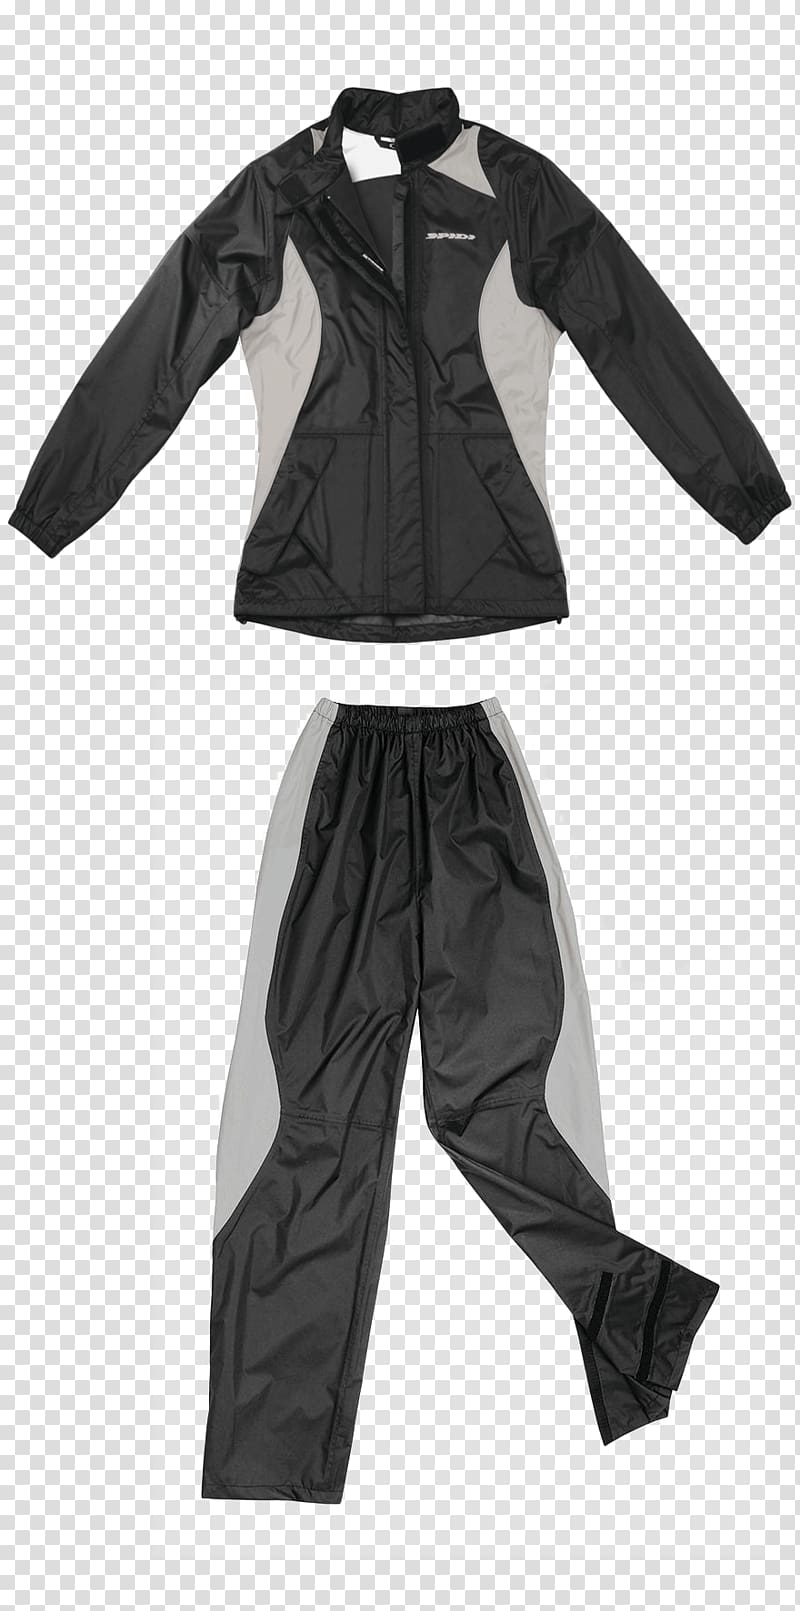 Discounts and allowances Женская одежда Motorcycle Clothing Online shopping, motorcycle transparent background PNG clipart